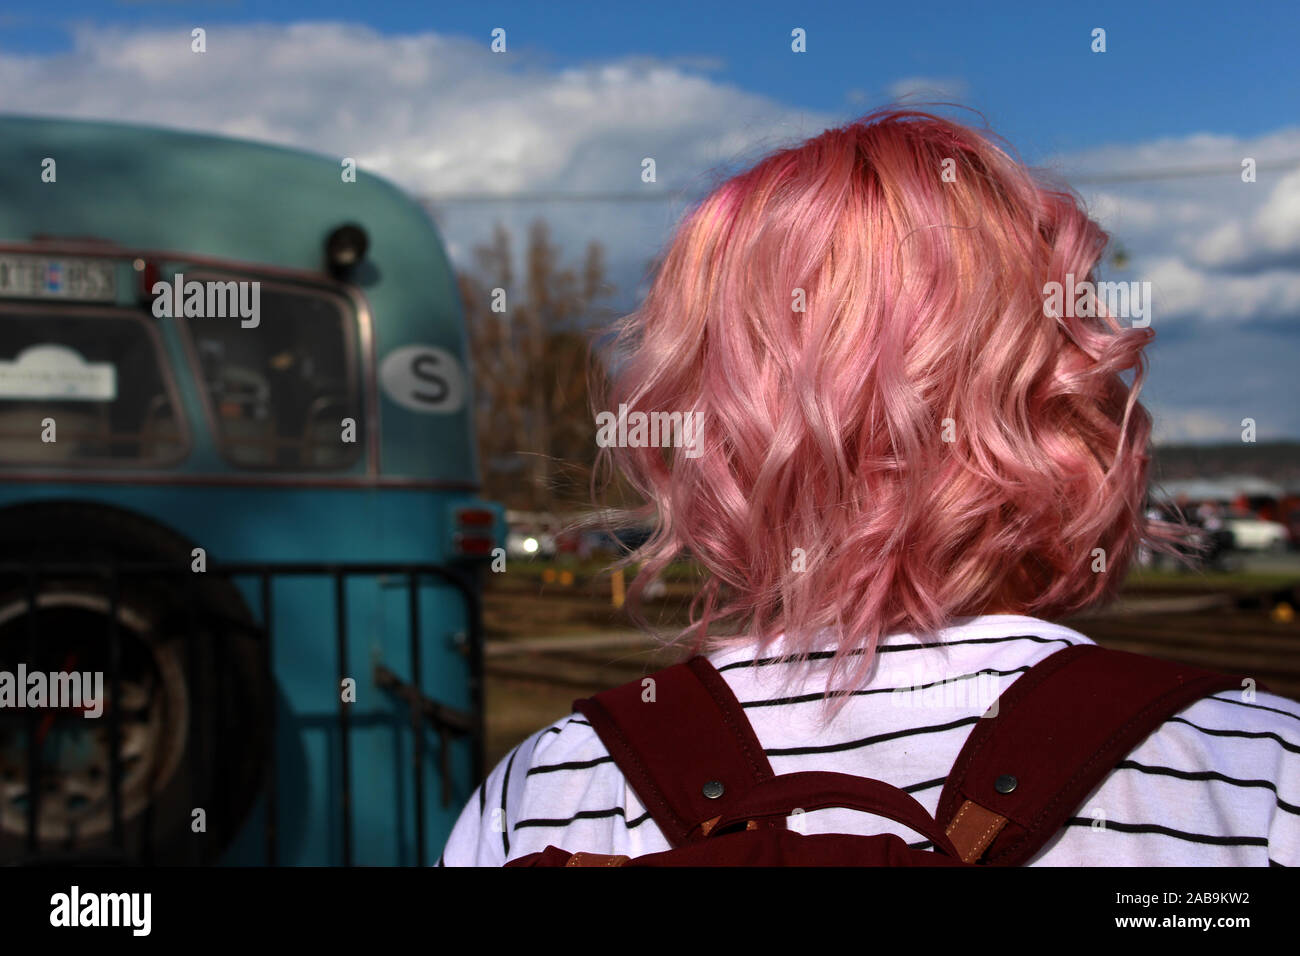 Girl with pink hair standing next to a blue bus Stock Photo